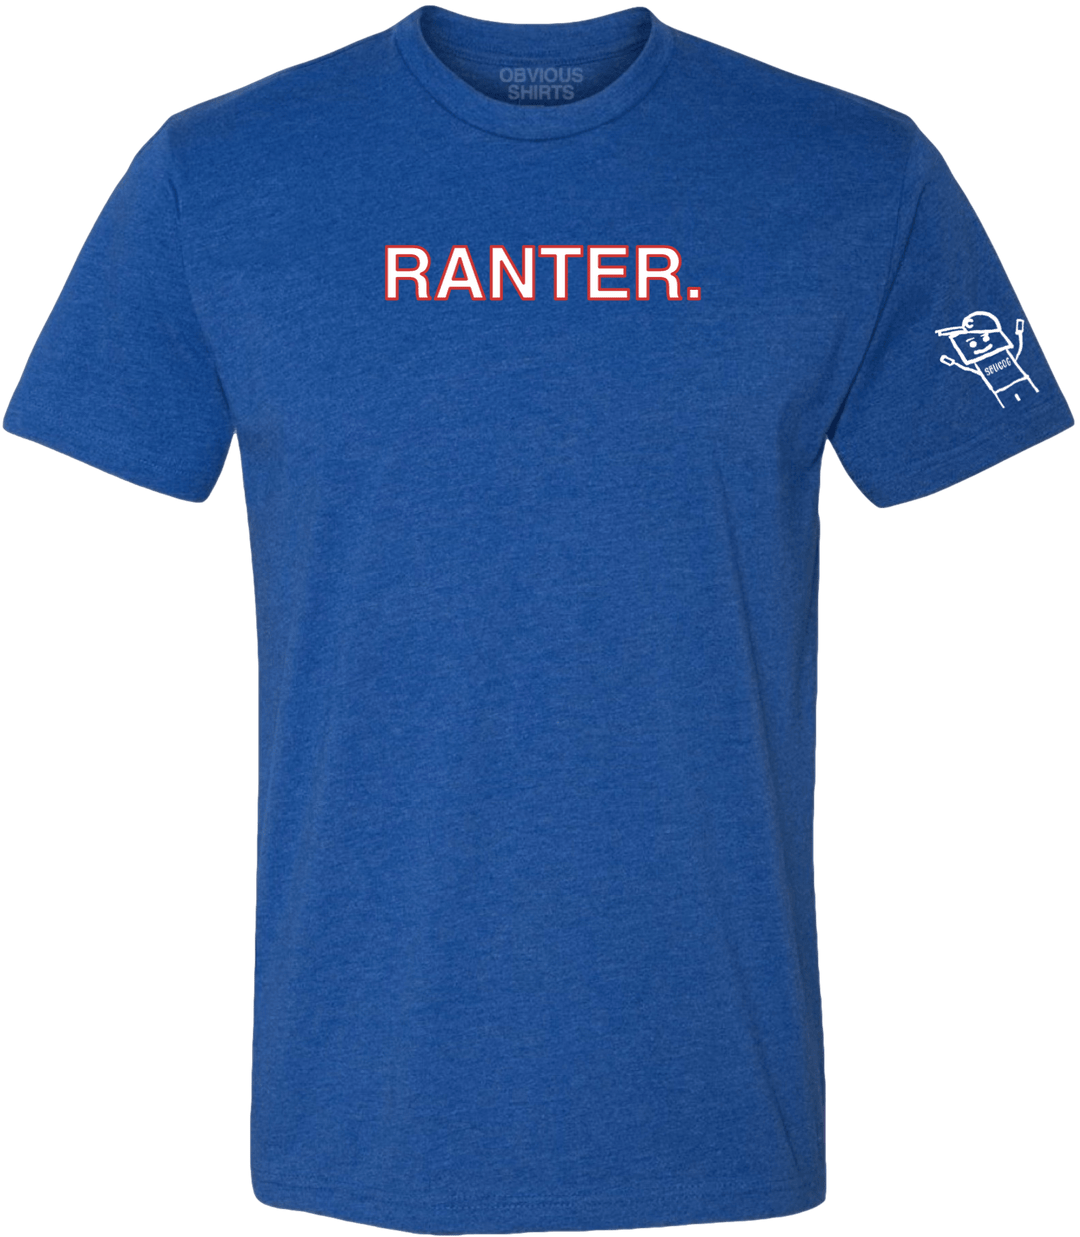 RANTER. (WHITE/RED) - OBVIOUS SHIRTS